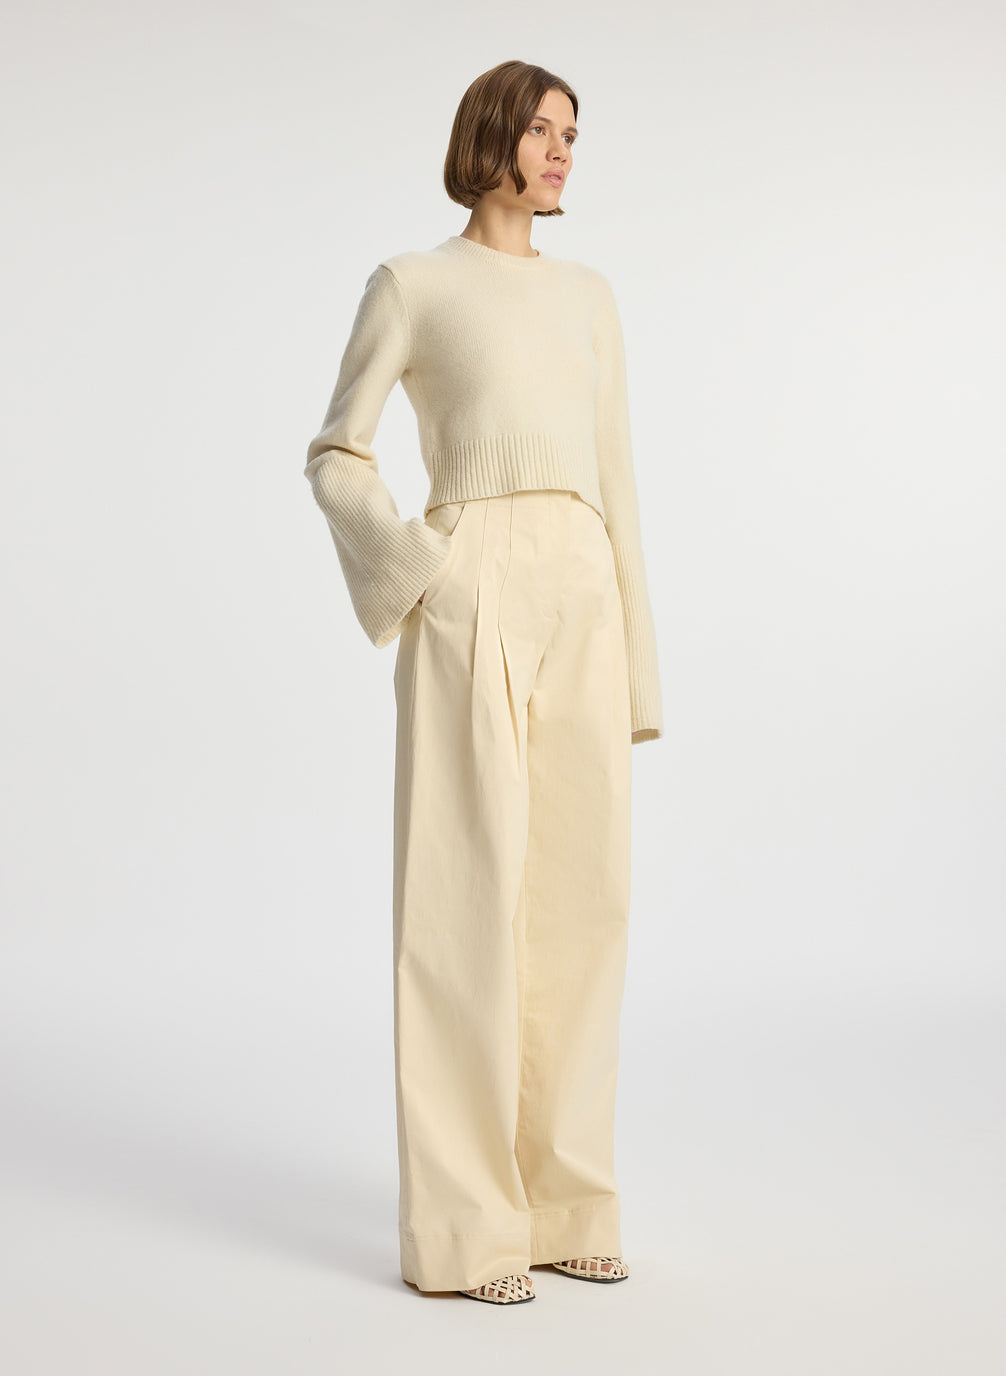 side view of woman wearing cream sweater and beige pants